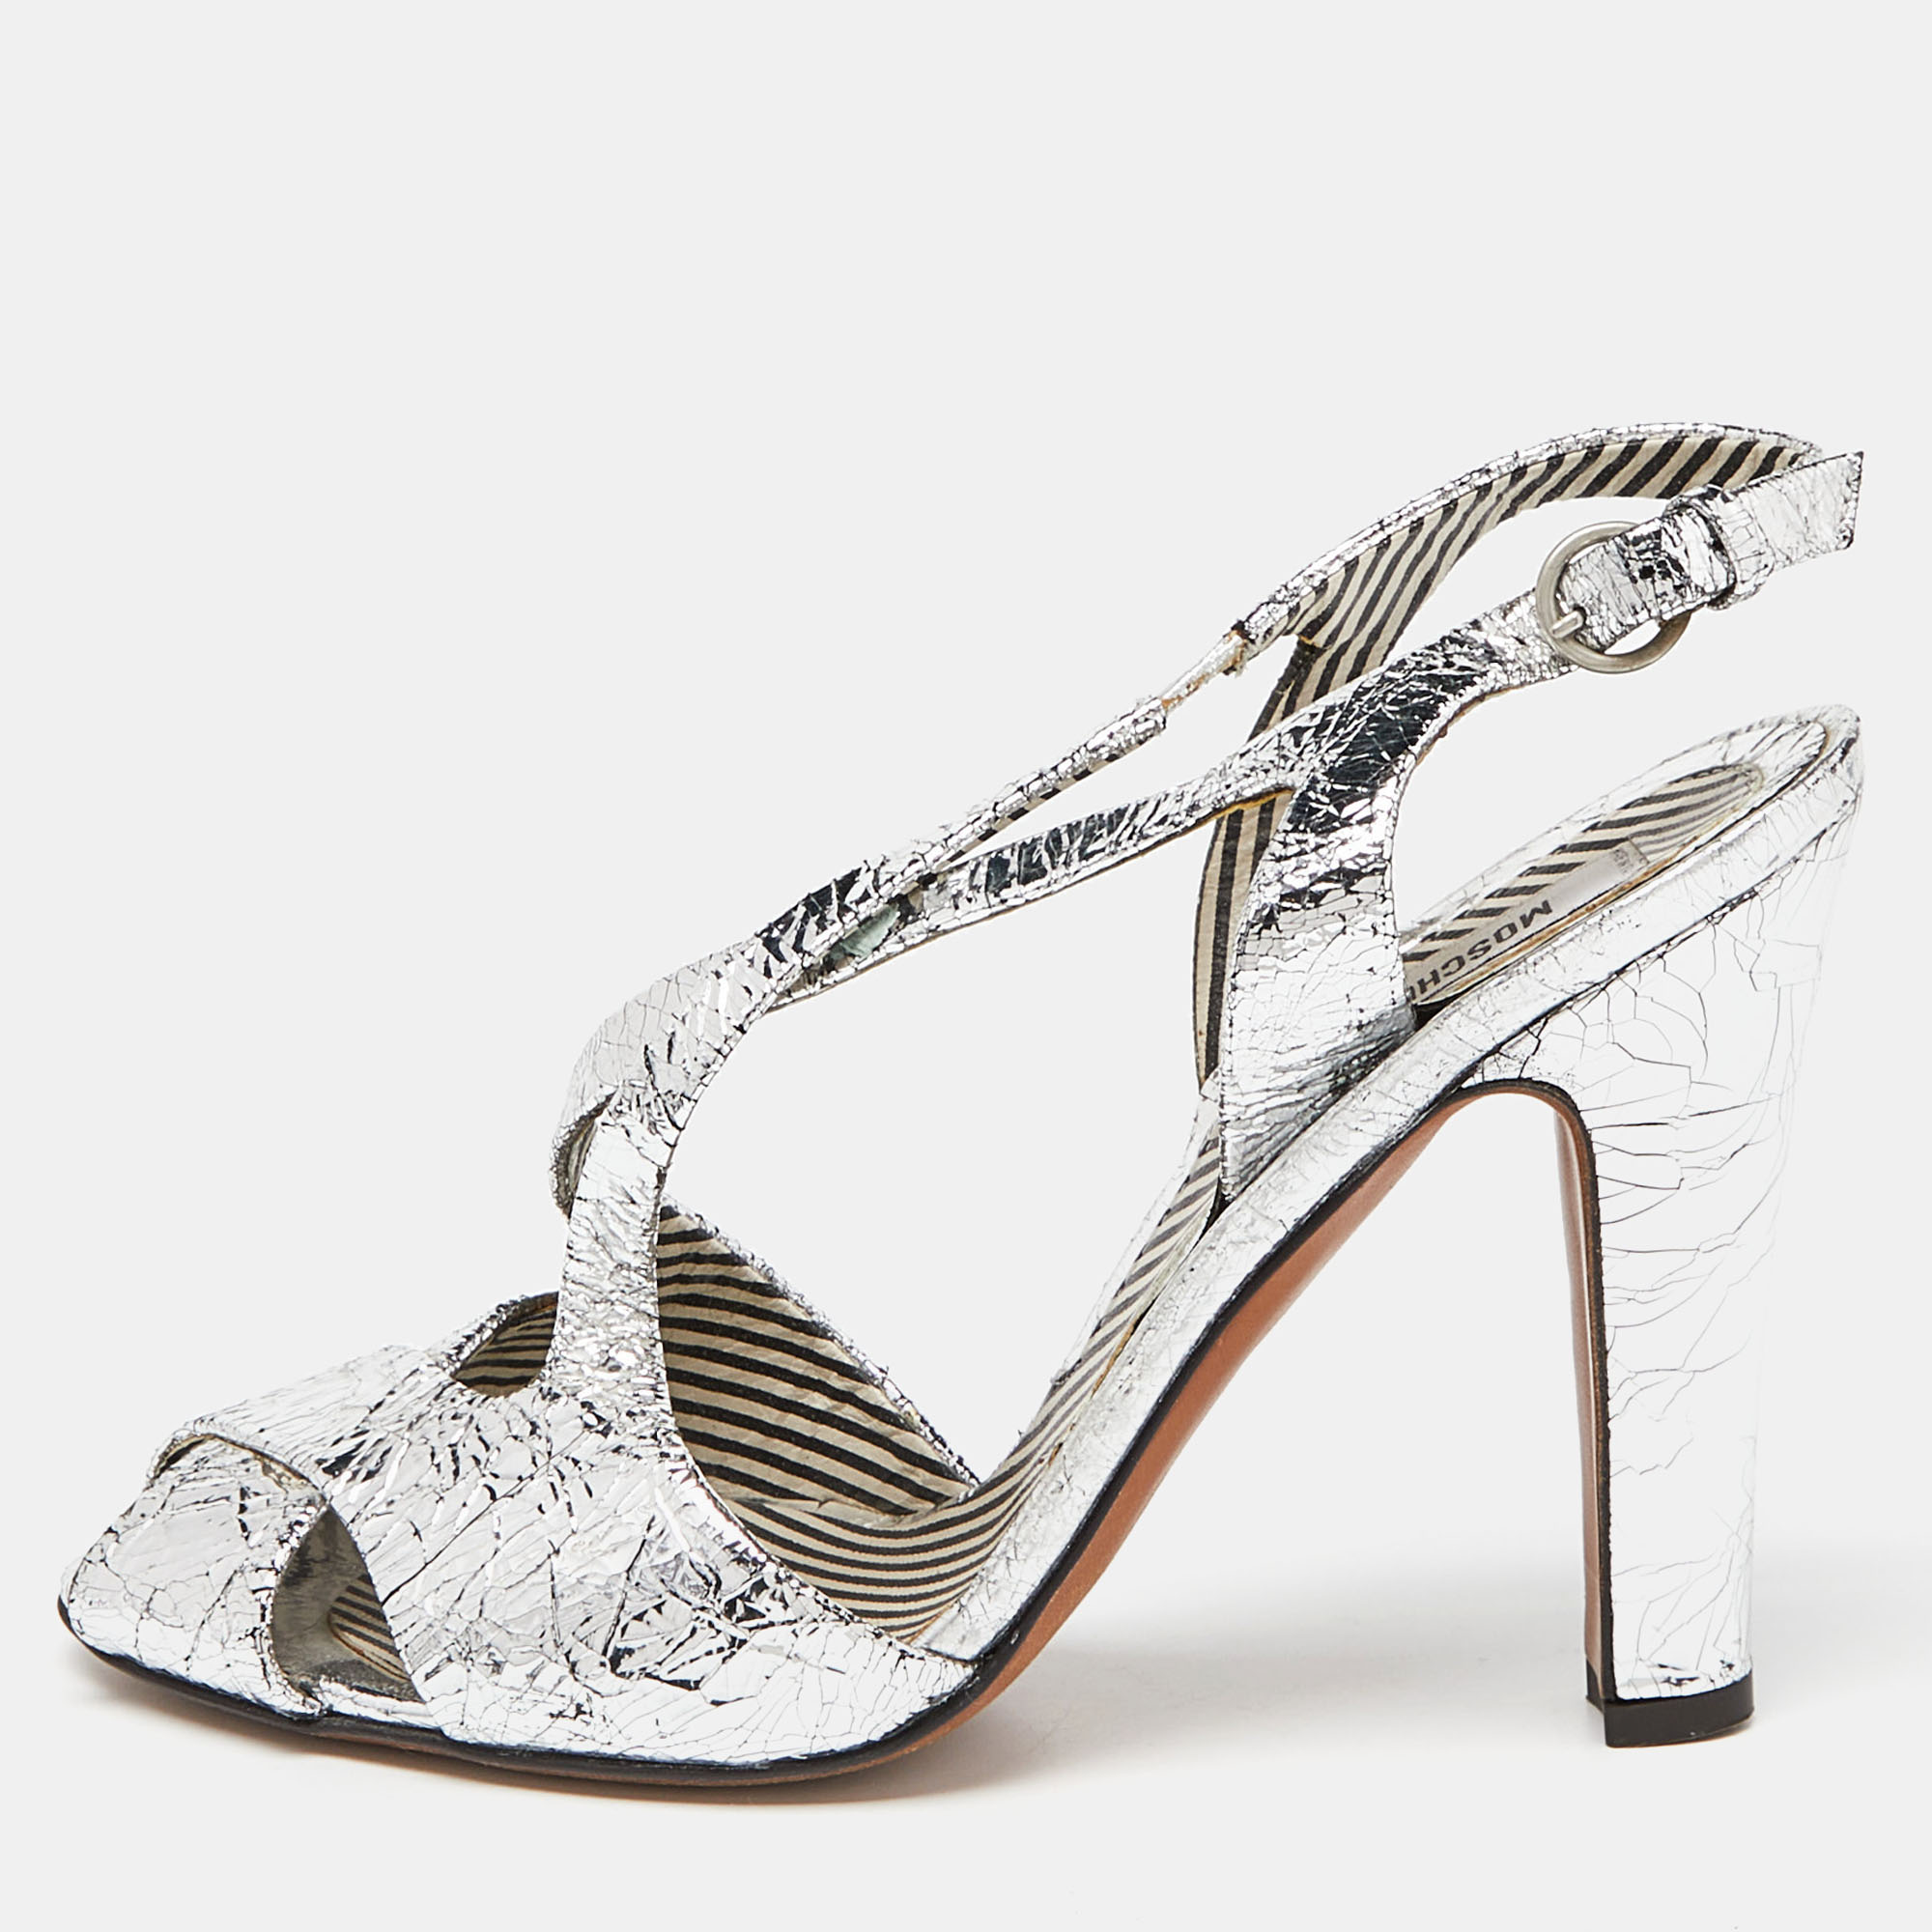 Pre-owned Moschino Silver Crinkled Leather Slingback Sandals Size 38